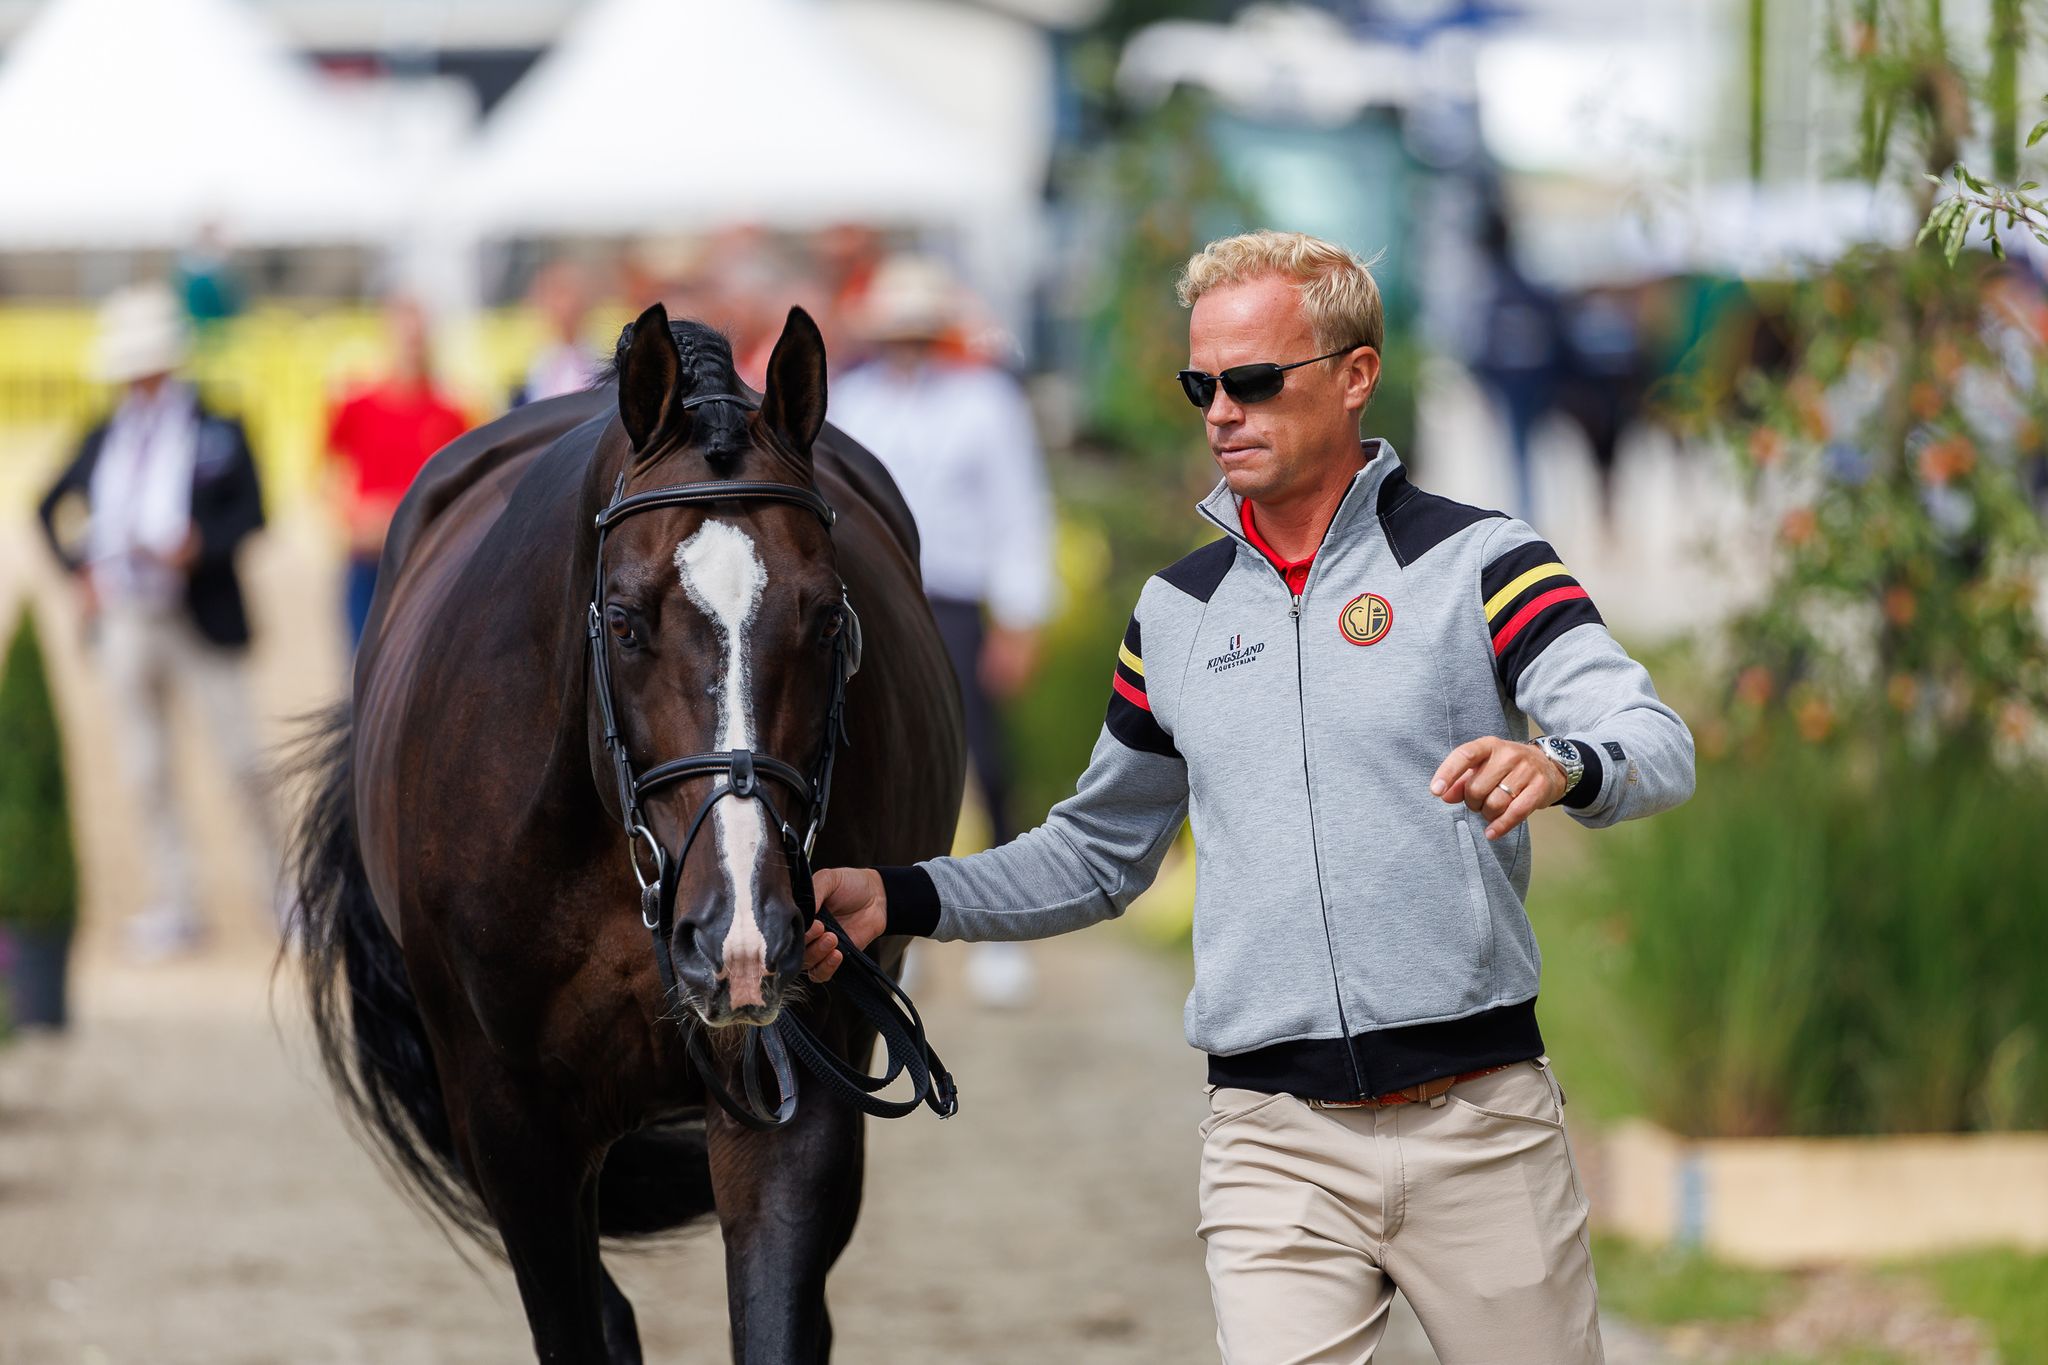 Photo review: The vetcheck for showjumping horses in Herning